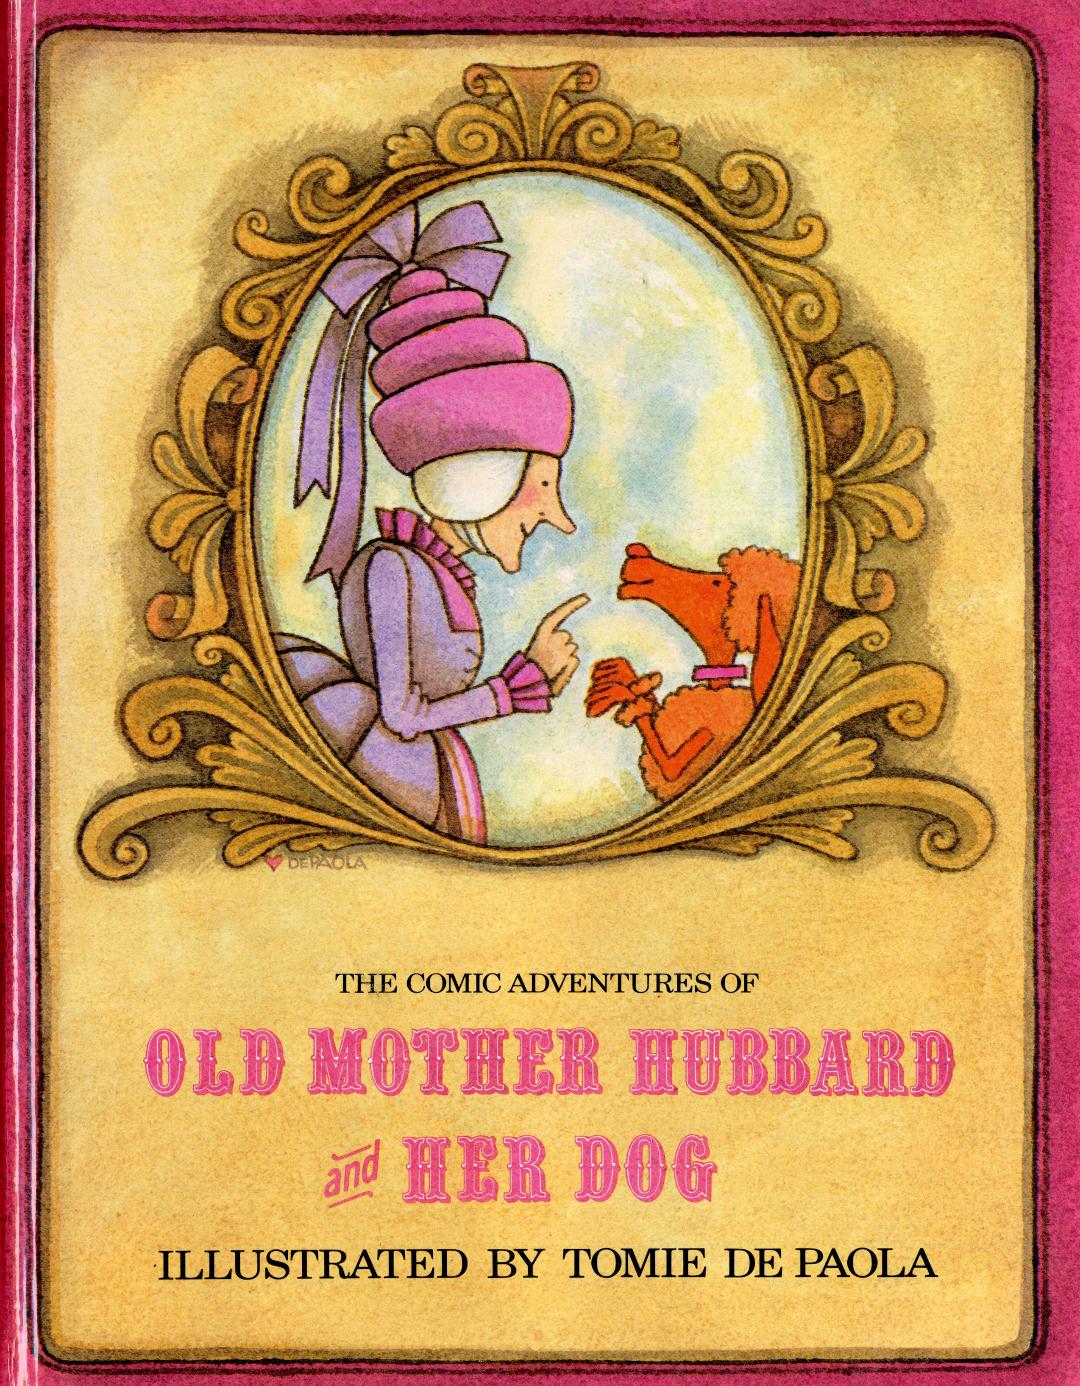 Comic Adventures of Old Mother Hubbard, The.jpg